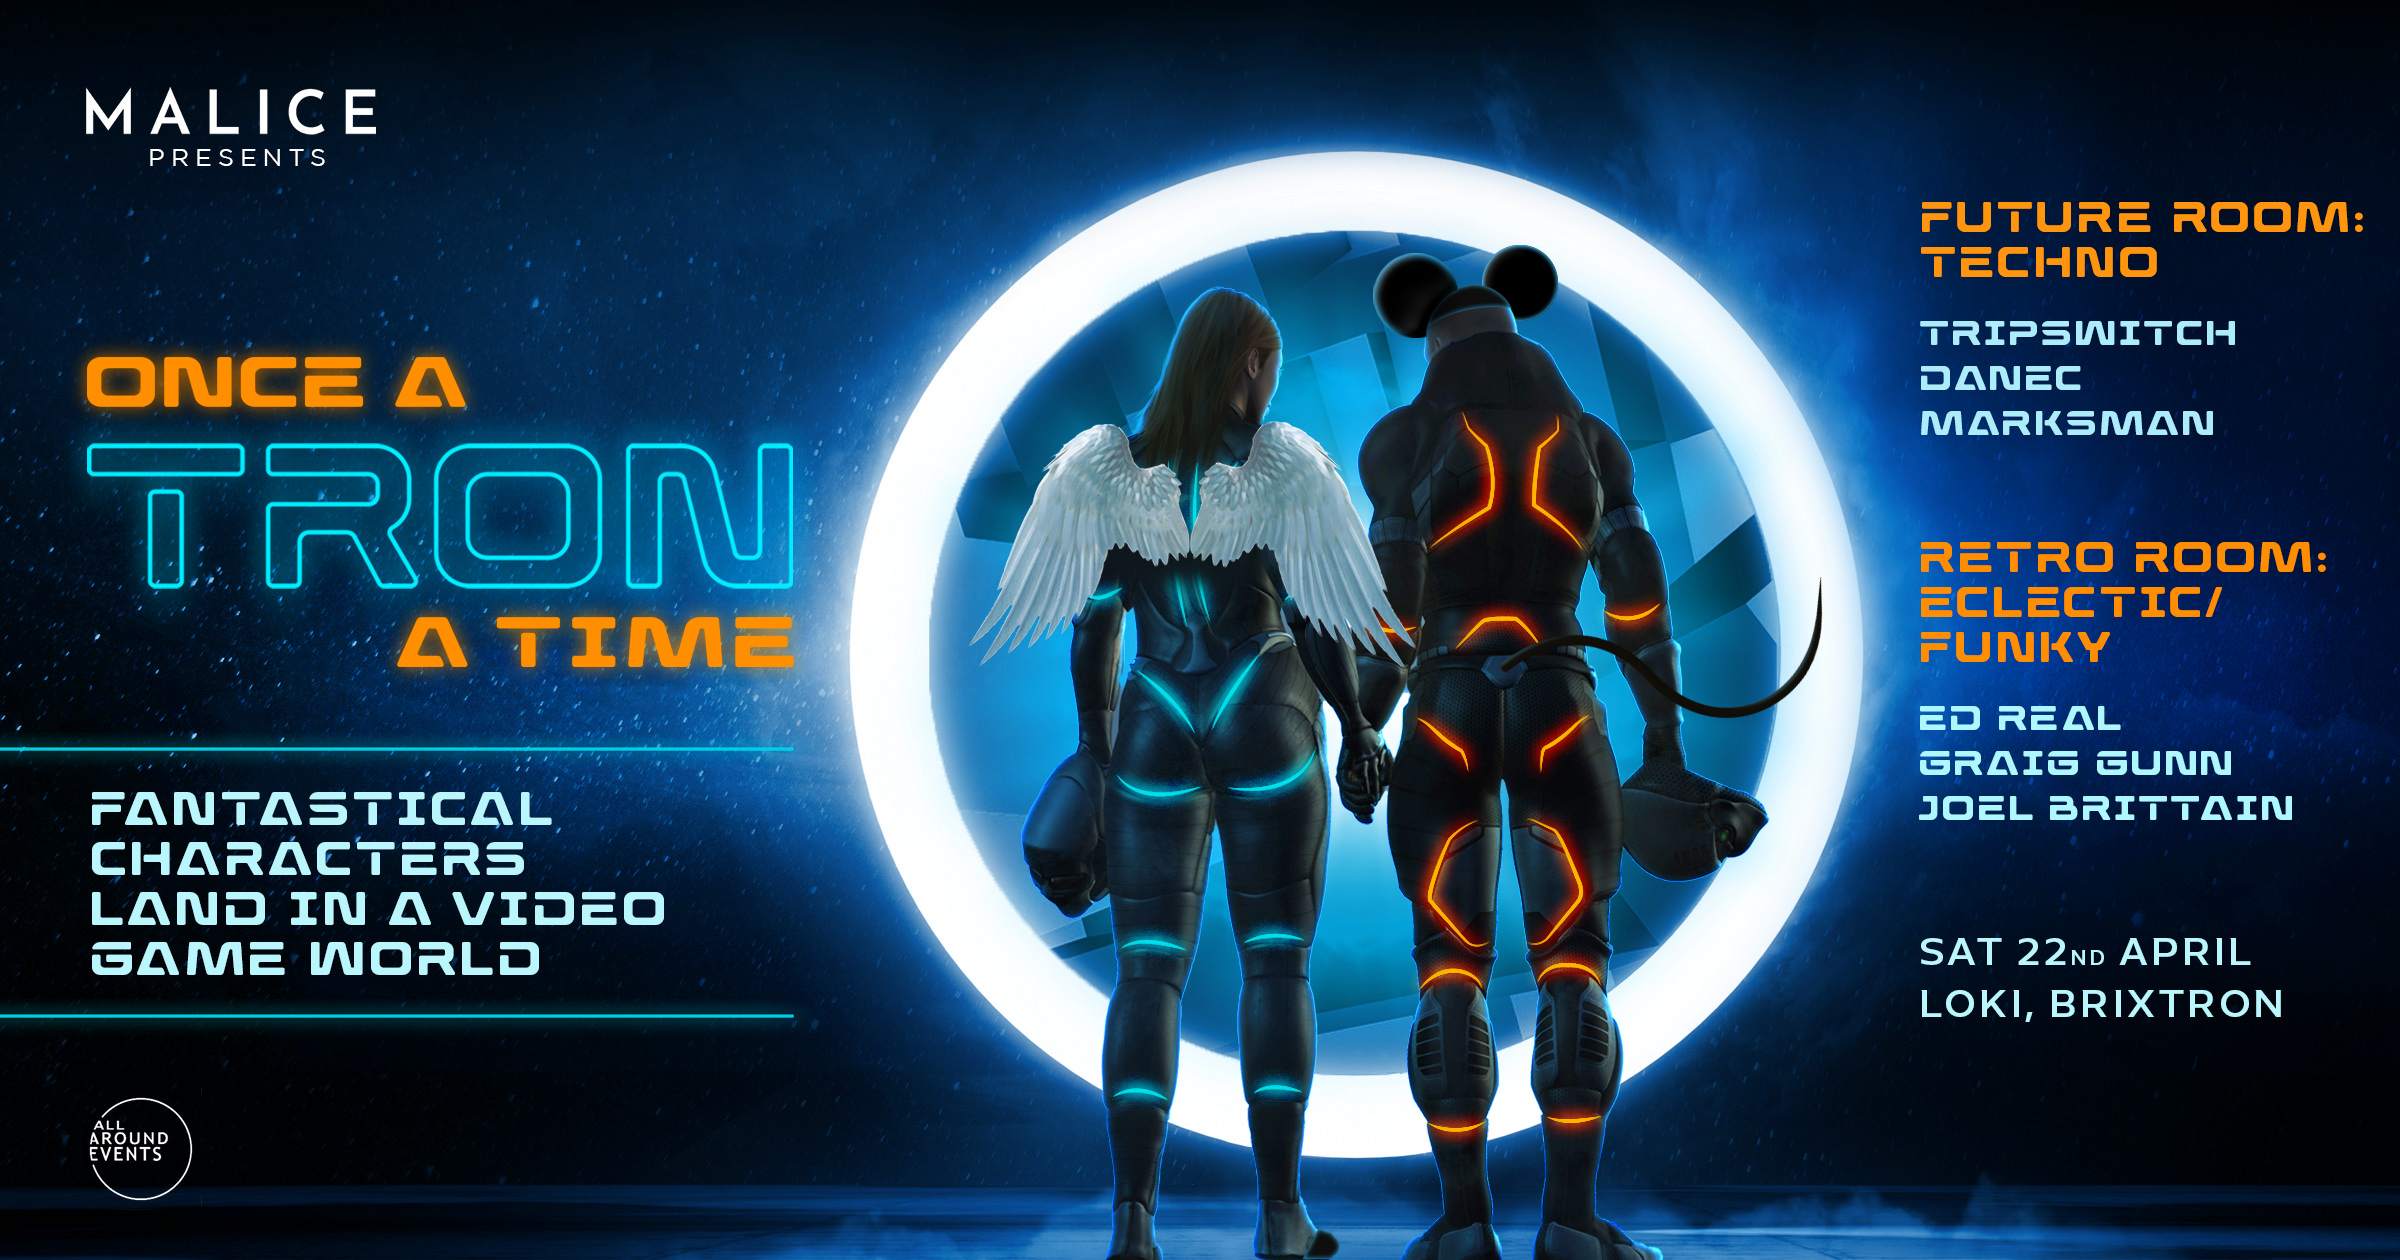 Malice presents: Once a Tron a time - Página frontal